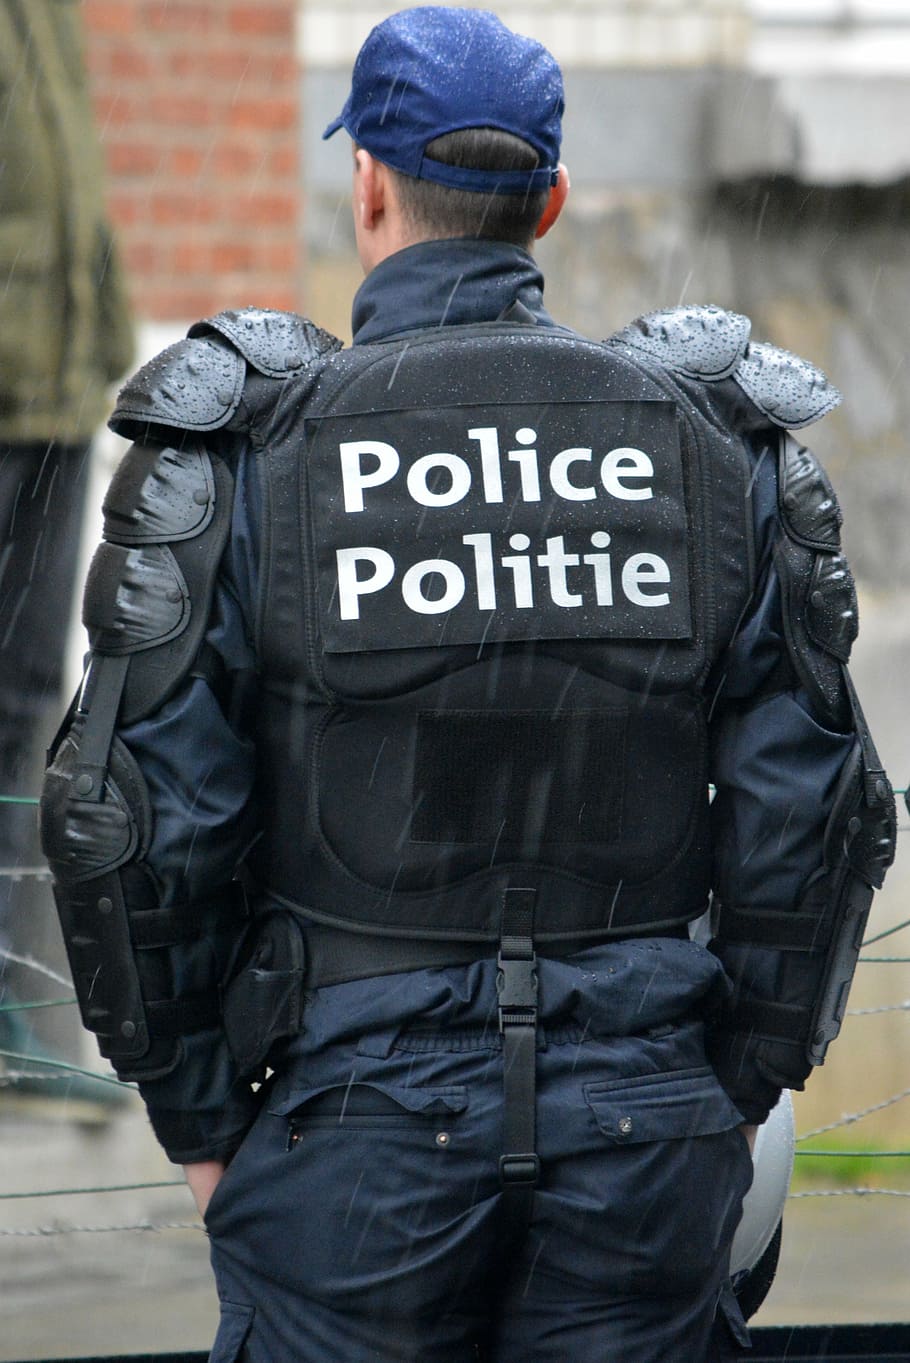 police, blue, agent, people, police officer, uniform, job, combat equipment, rear view, clothing